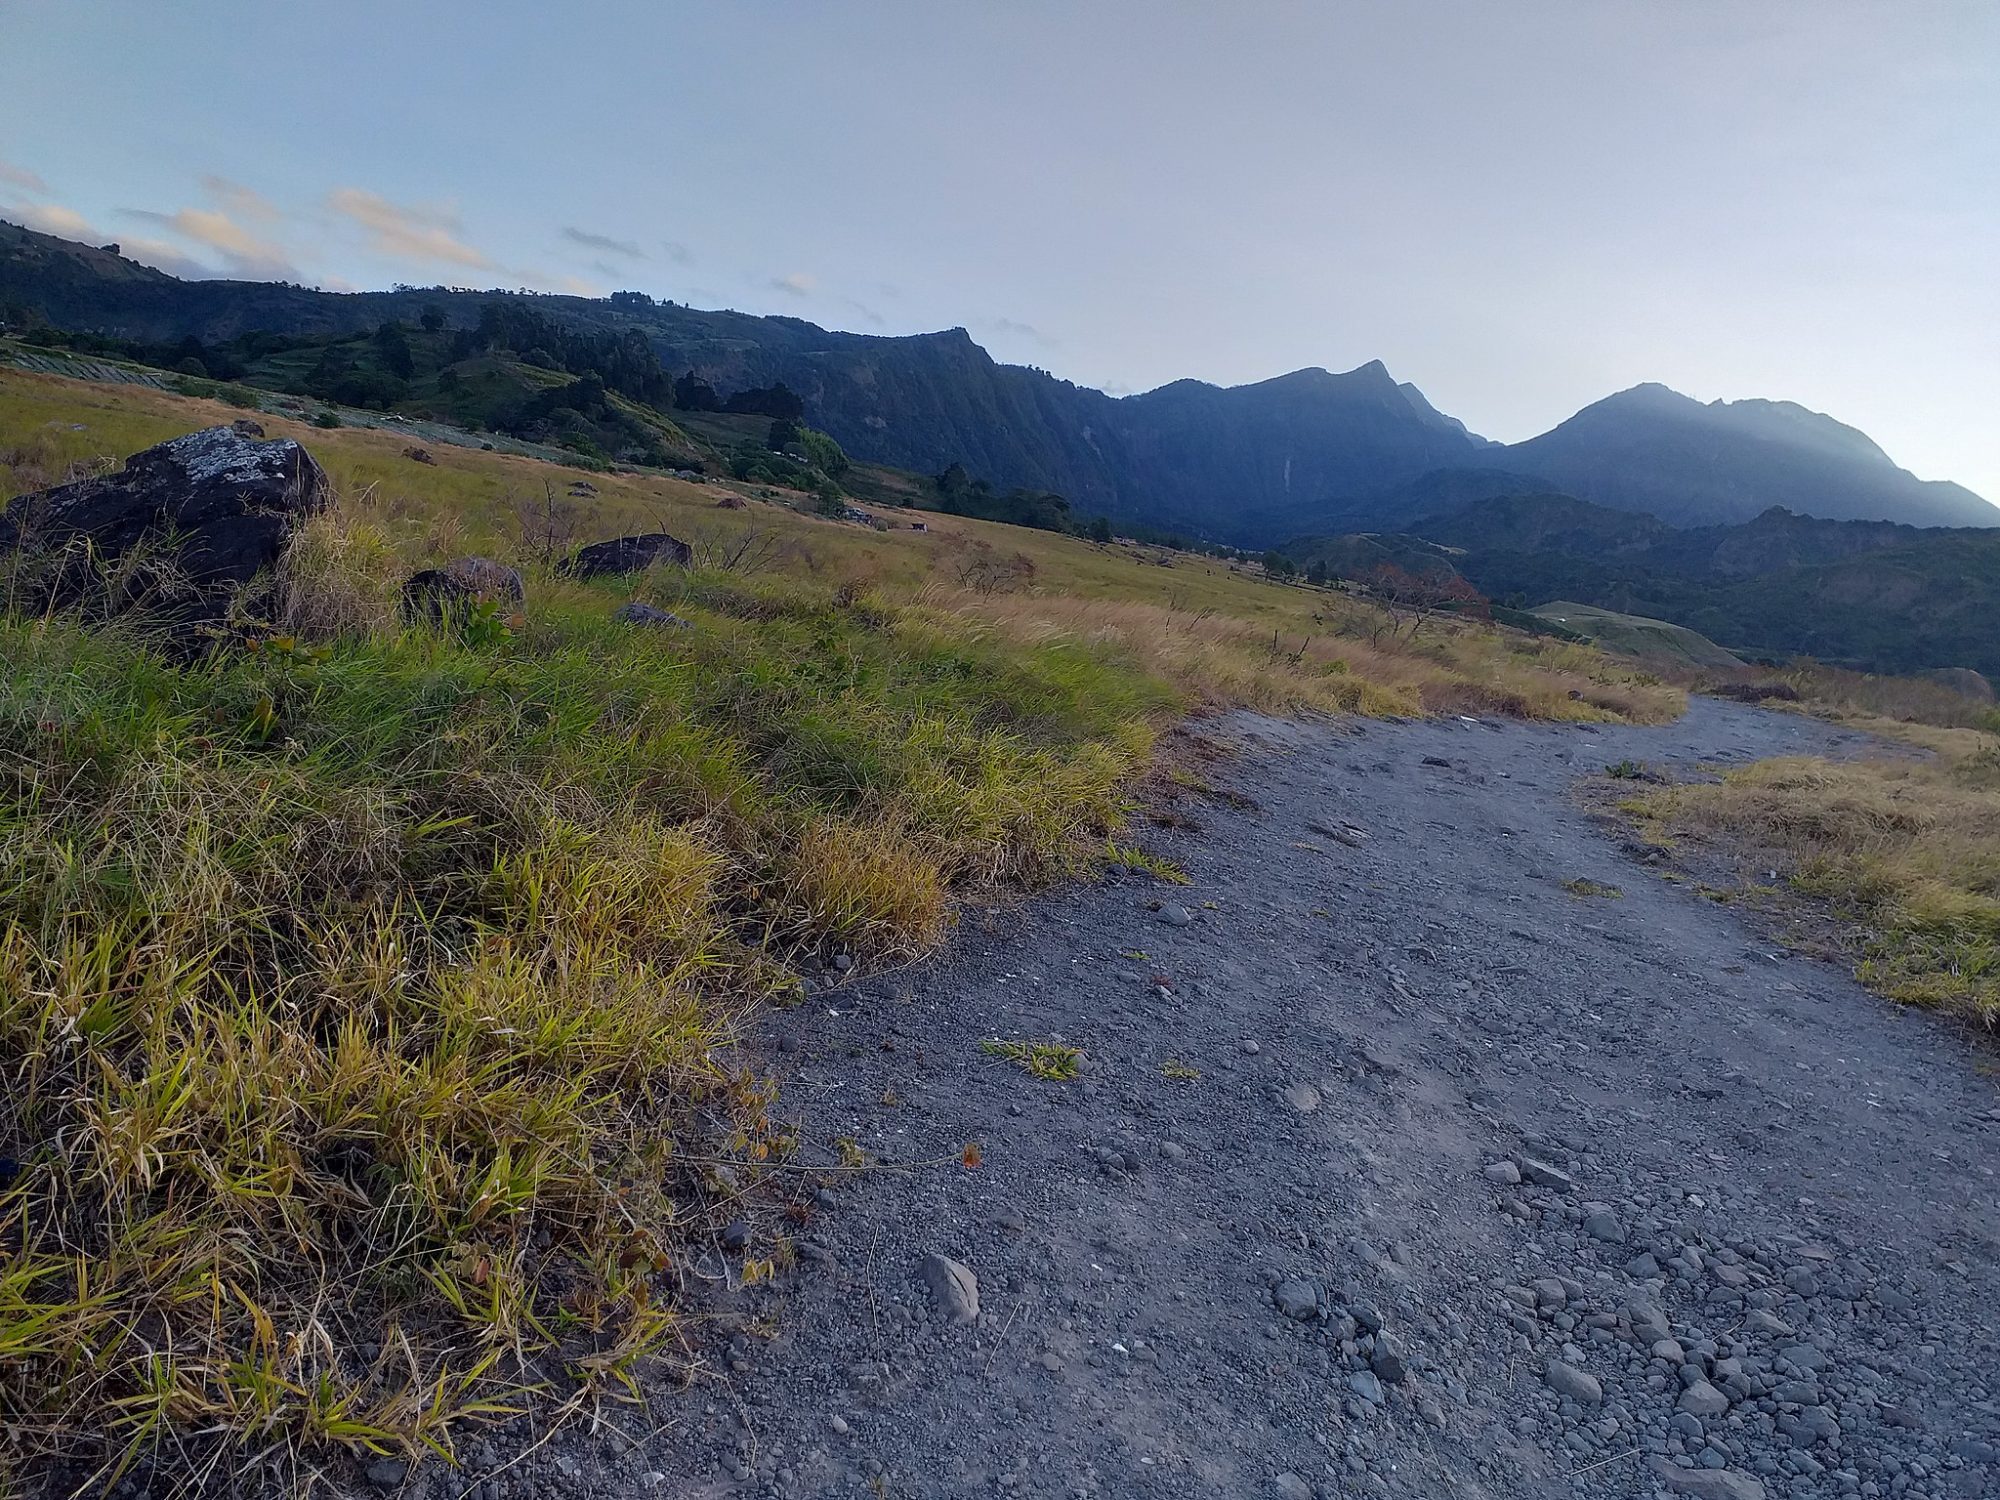 A view of Volcan Baru nationl park from one of the trails.